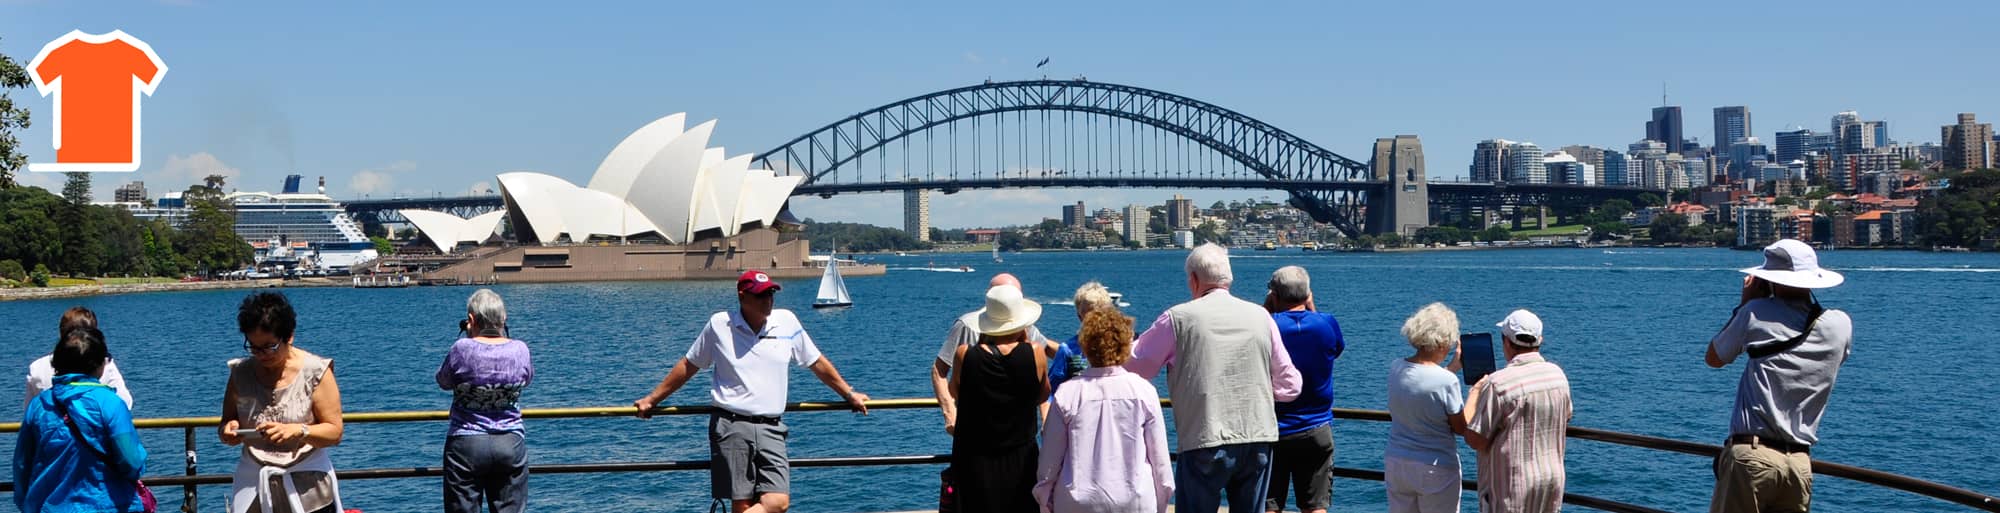 A Sydney sightseeing bus has stopped at Mrs Macquarie's Point, where tourists are taking pictures of the Sydney Opera House and Sydney Harbour Bridge in the background.